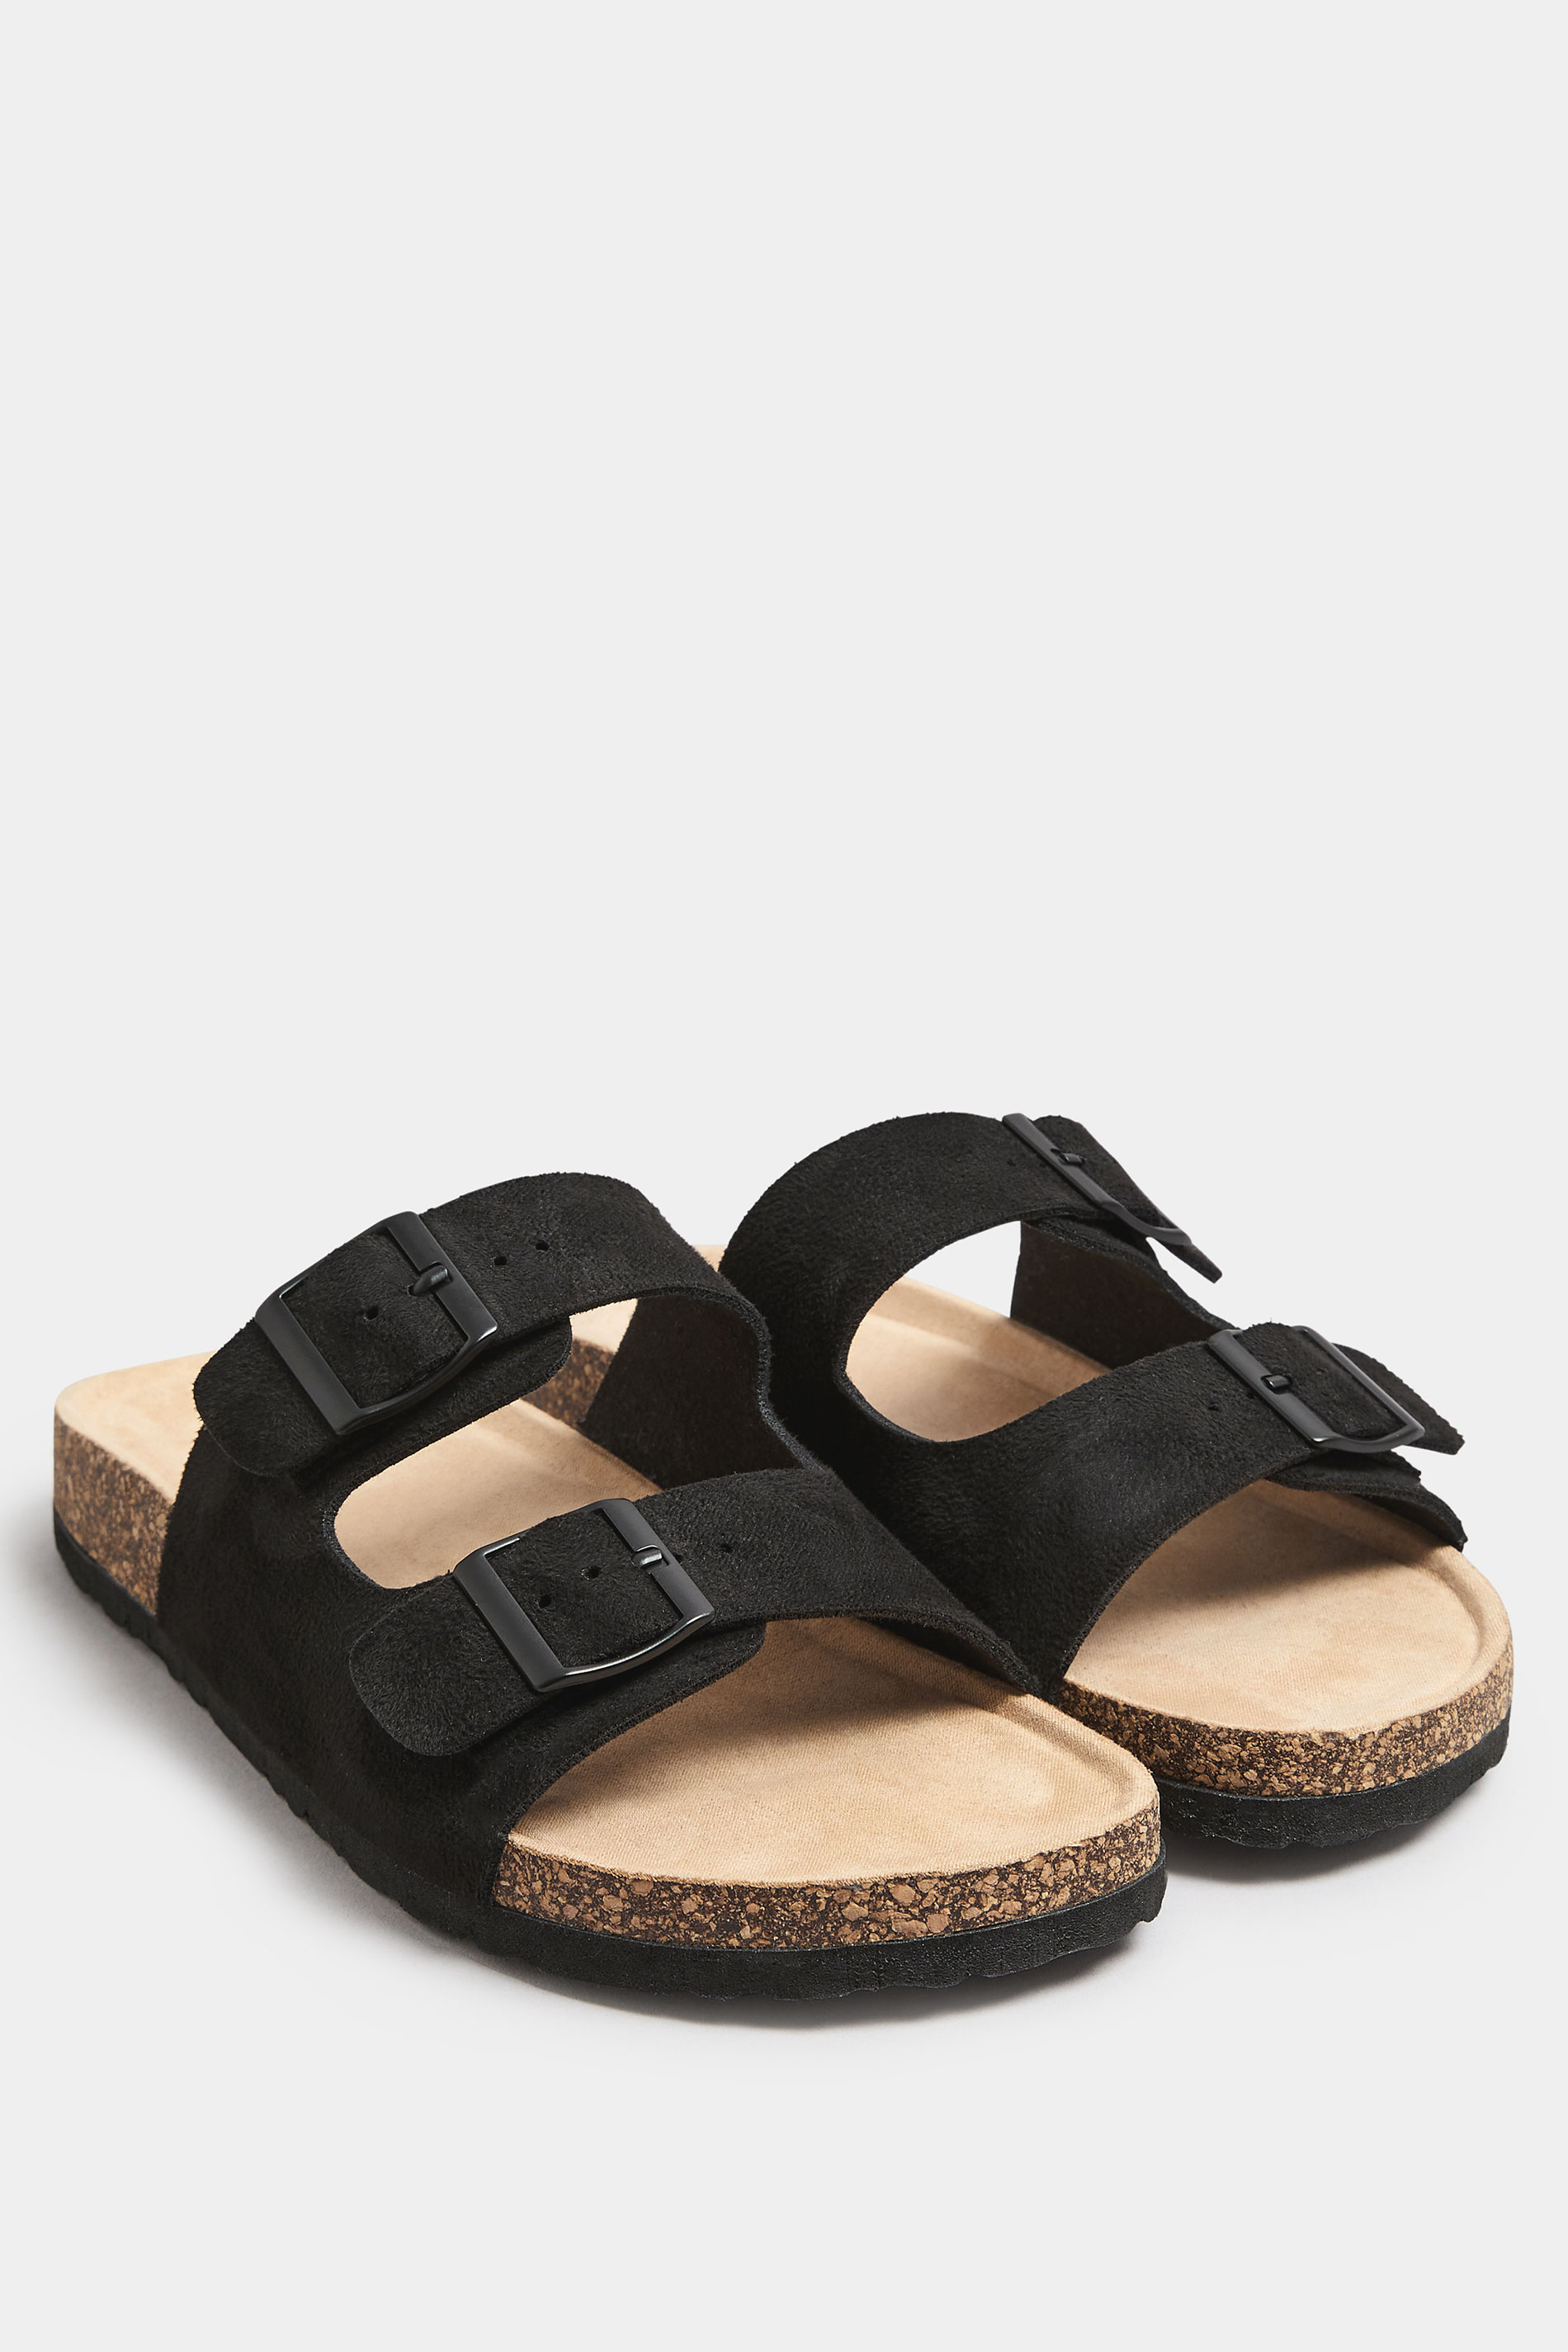 Black Faux Suede Buckle Strap Footbed Sandals In Extra Wide EEE Fit | Yours Clothing 2